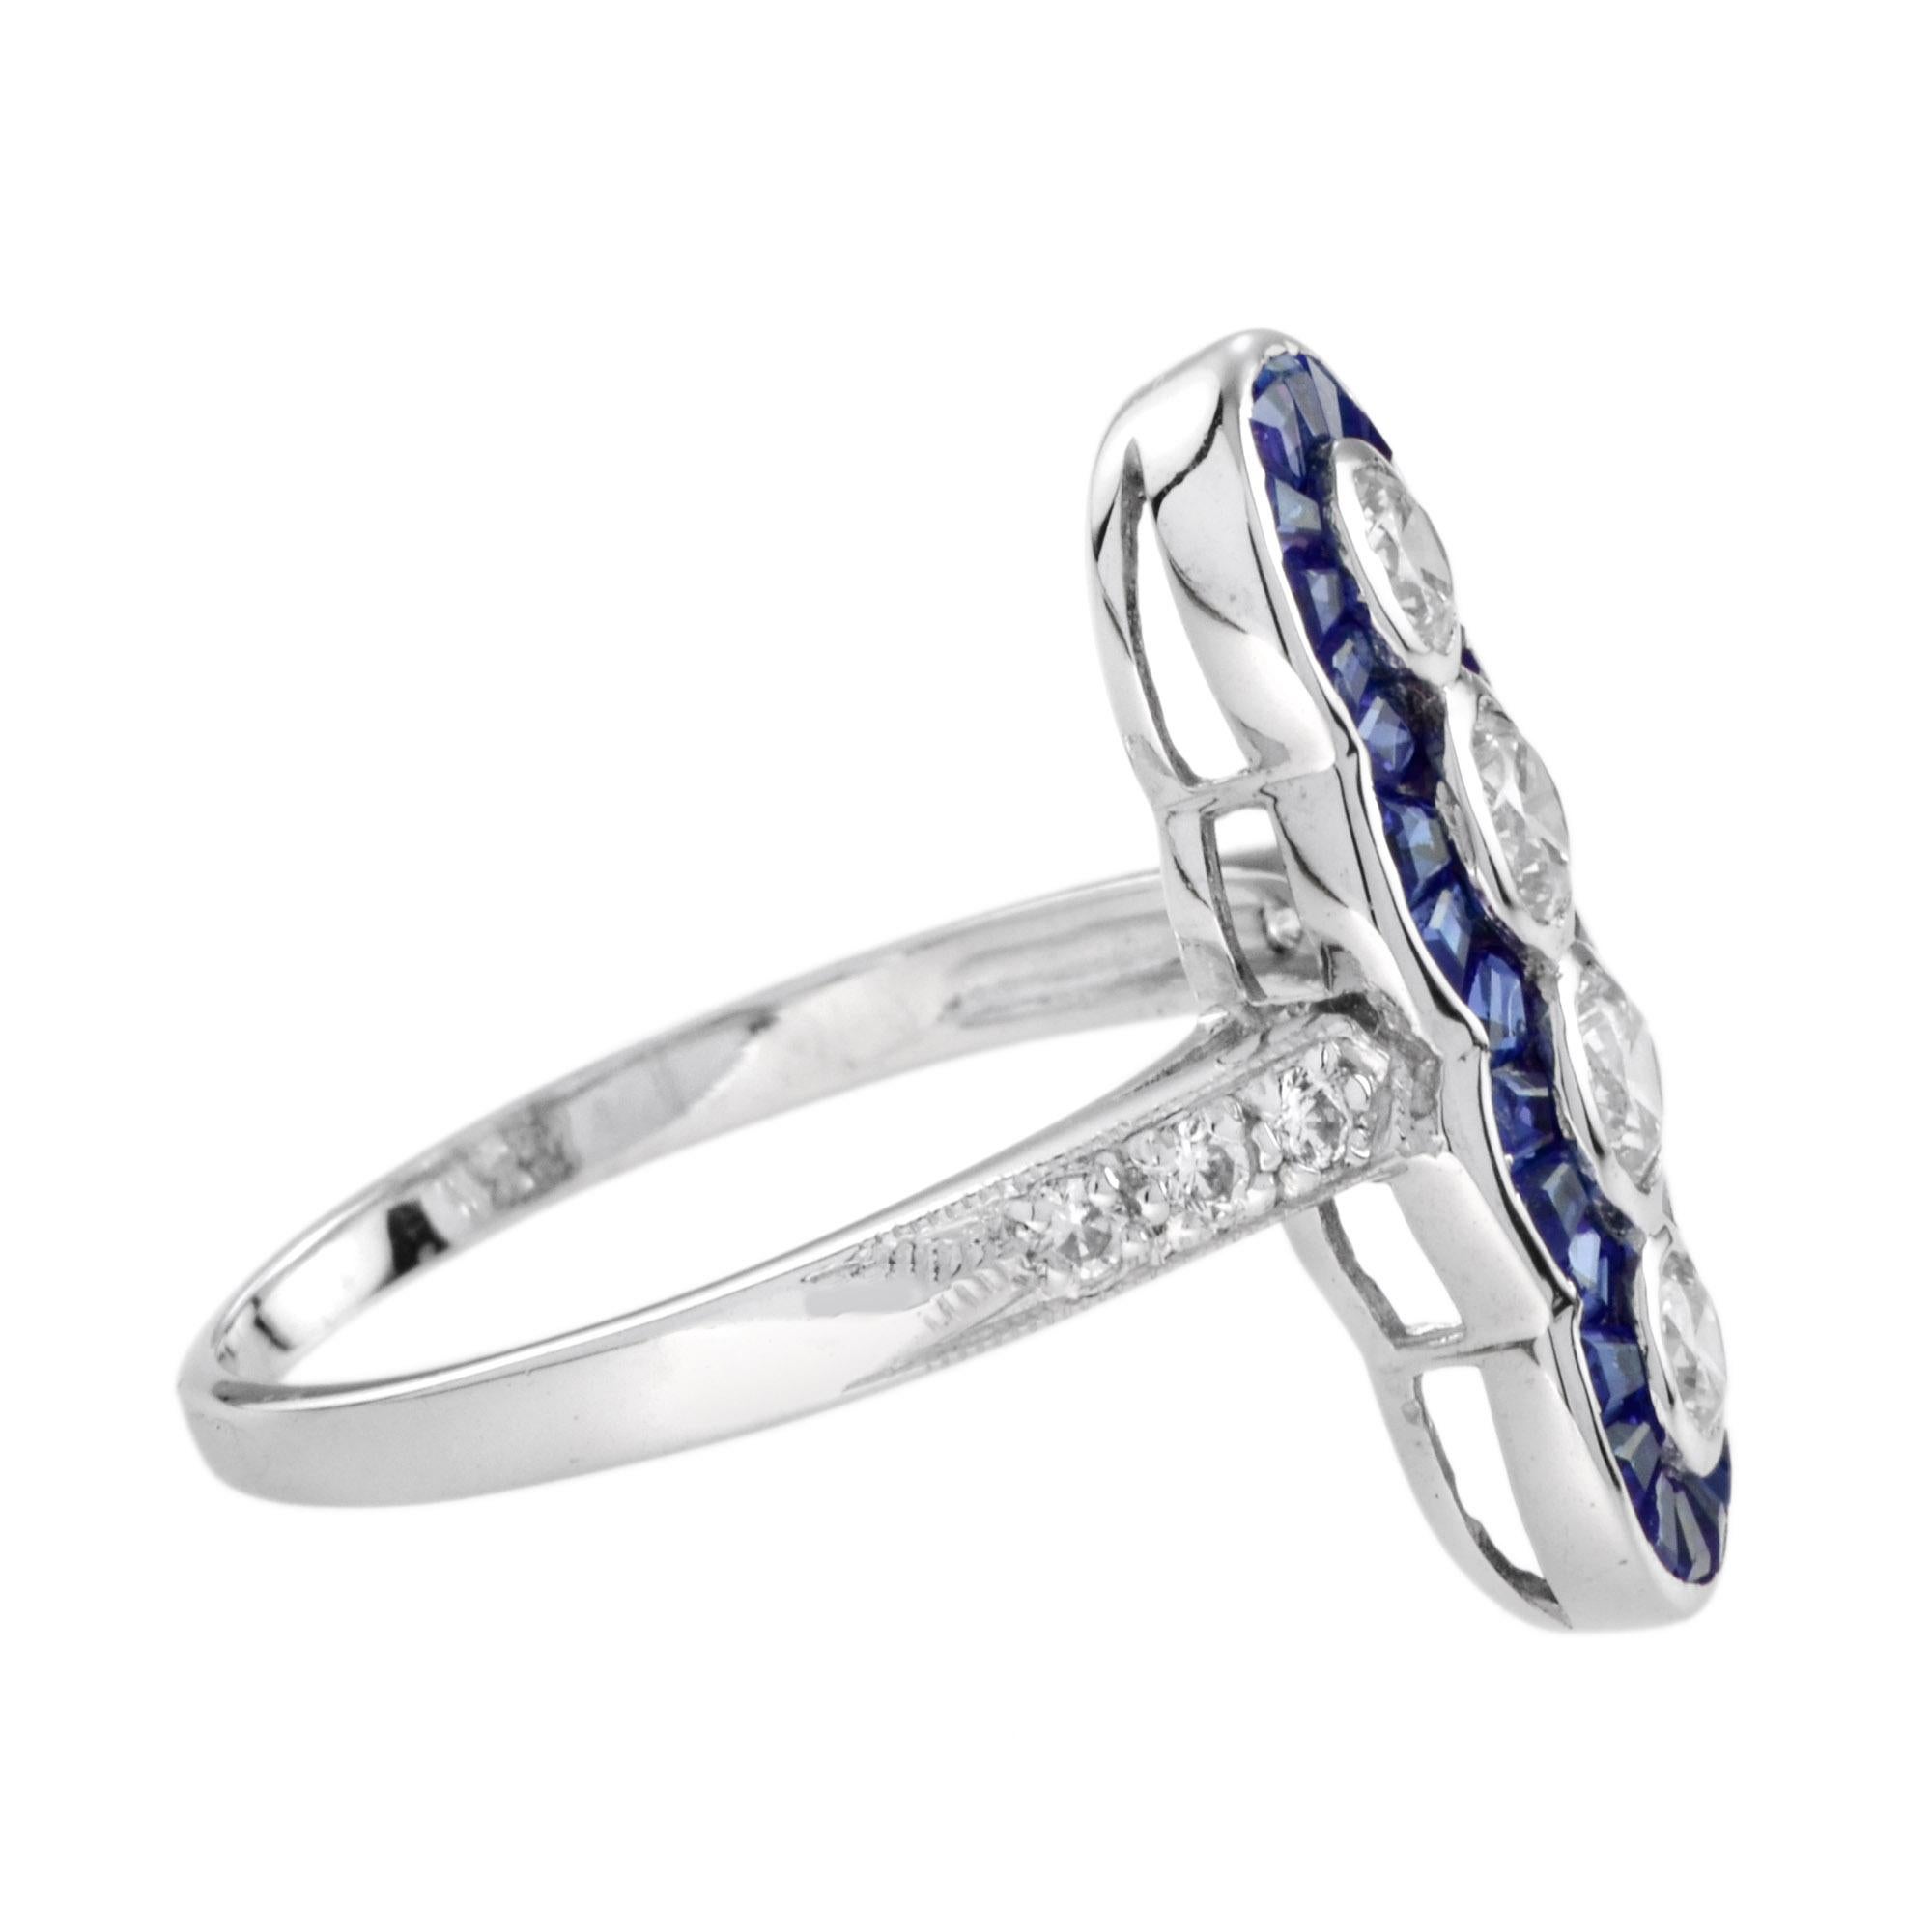 For Sale:  Four Stone Diamond and Sapphire Cocktail Ring in 14K White Gold 4